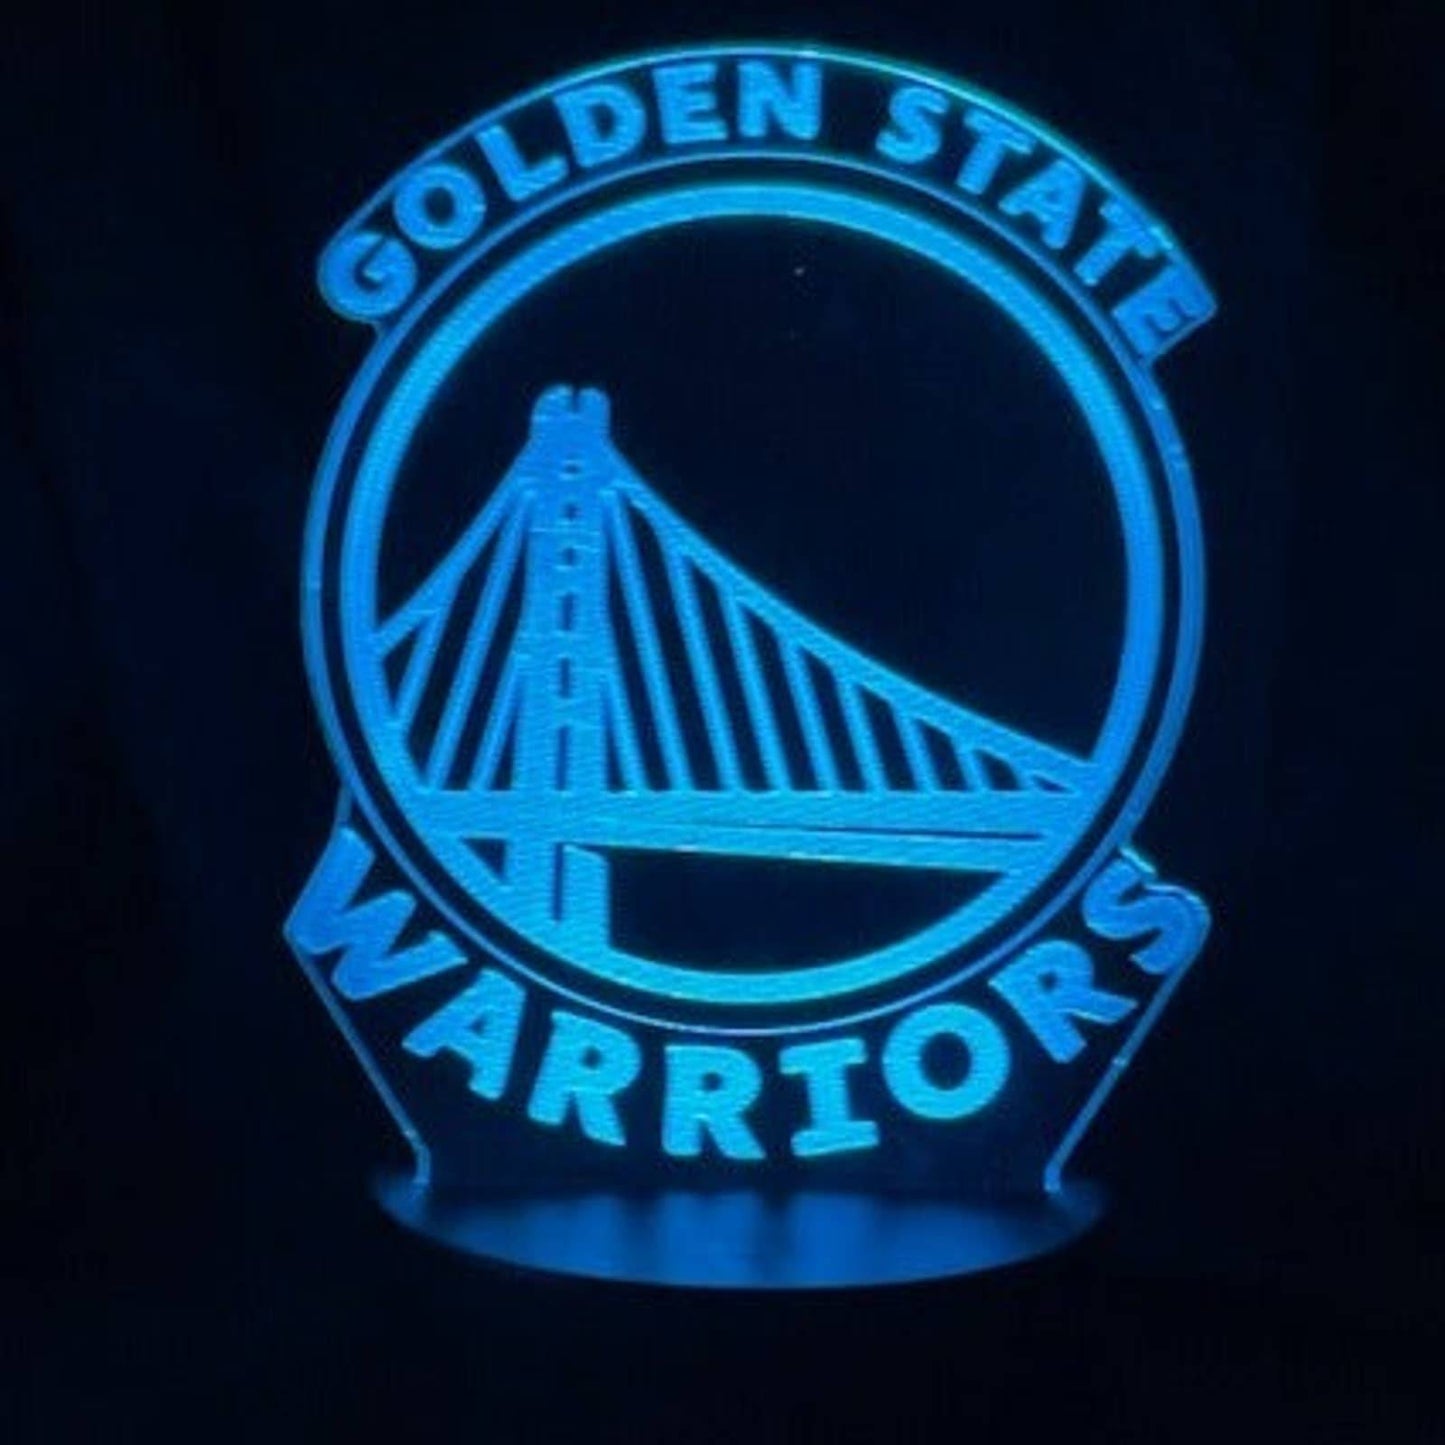 Golden State Warriors  3D LED Night-Light 7 Color Changing Lamp w/ Touch Switch